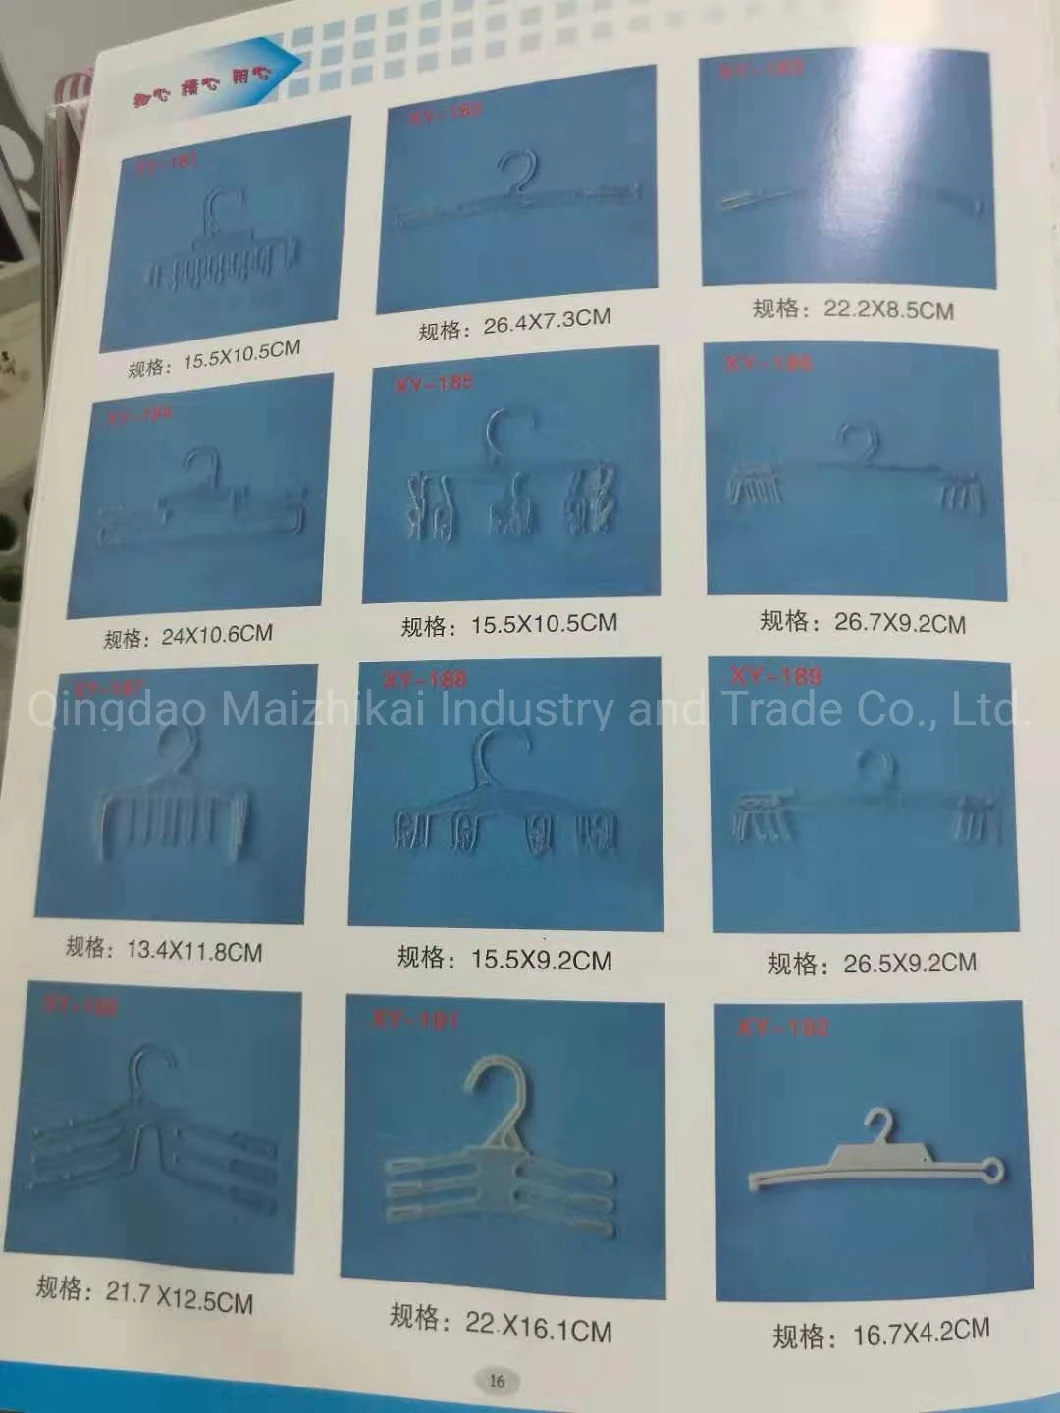 Garment /Cloth /Display /Laundry Plastic Pants Hanger in China Factory